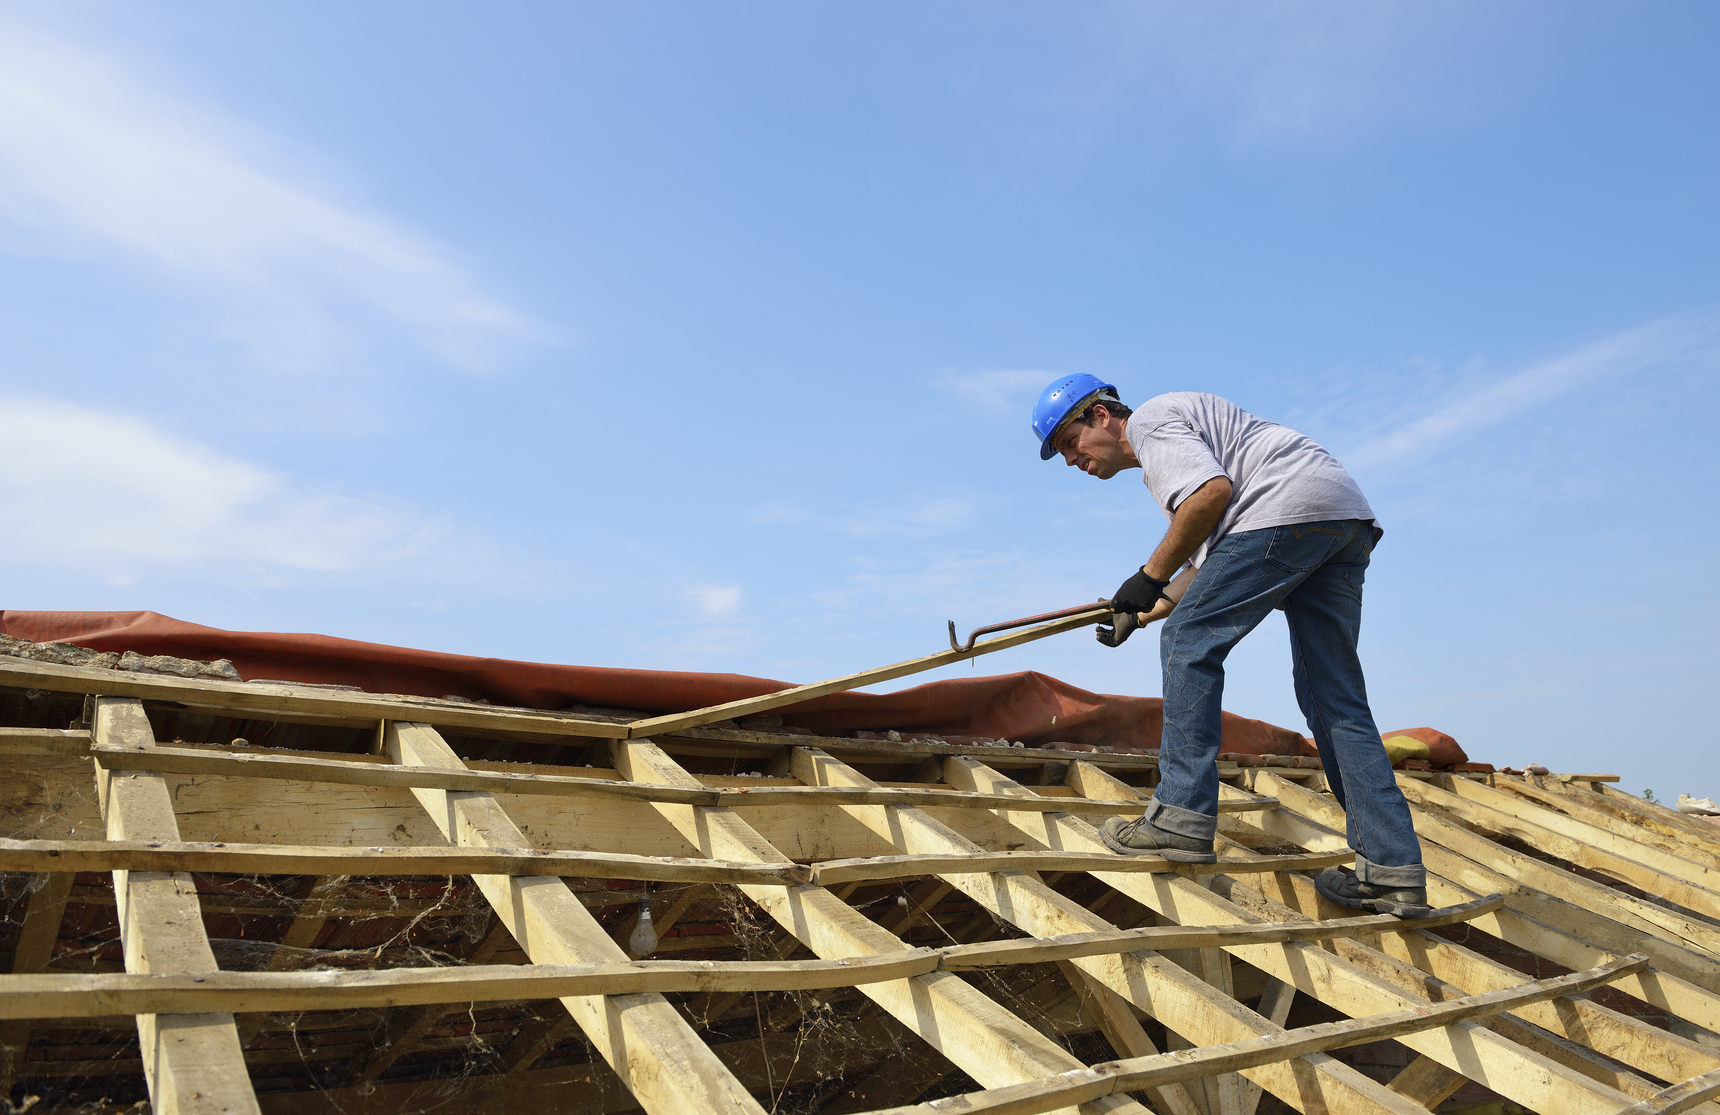 ROOFING IS A RISKY JOB! 4 TIPS FOR PROTECTING COMMERCIAL ROOFERS